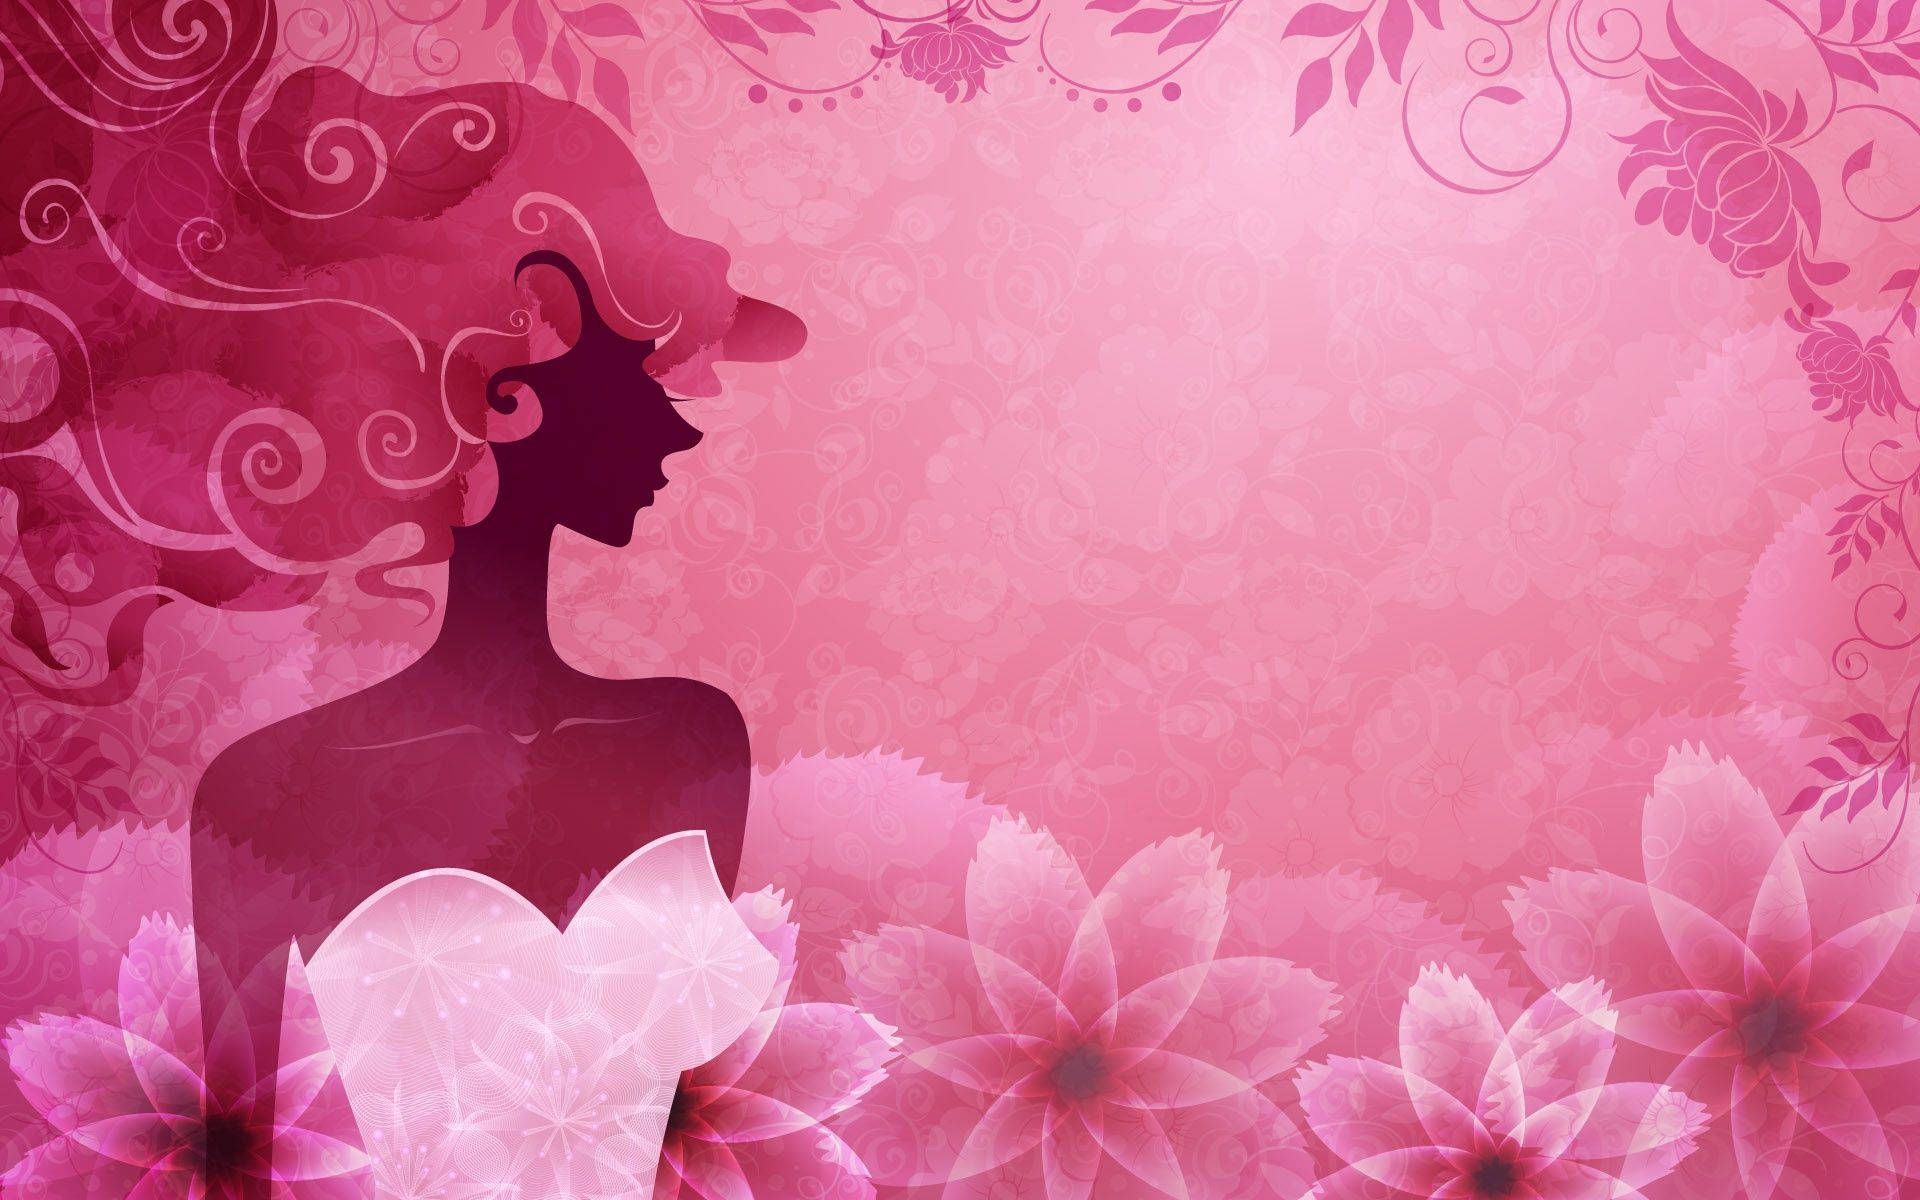 Pink Woman And Flowers On Wall Digital Art Background